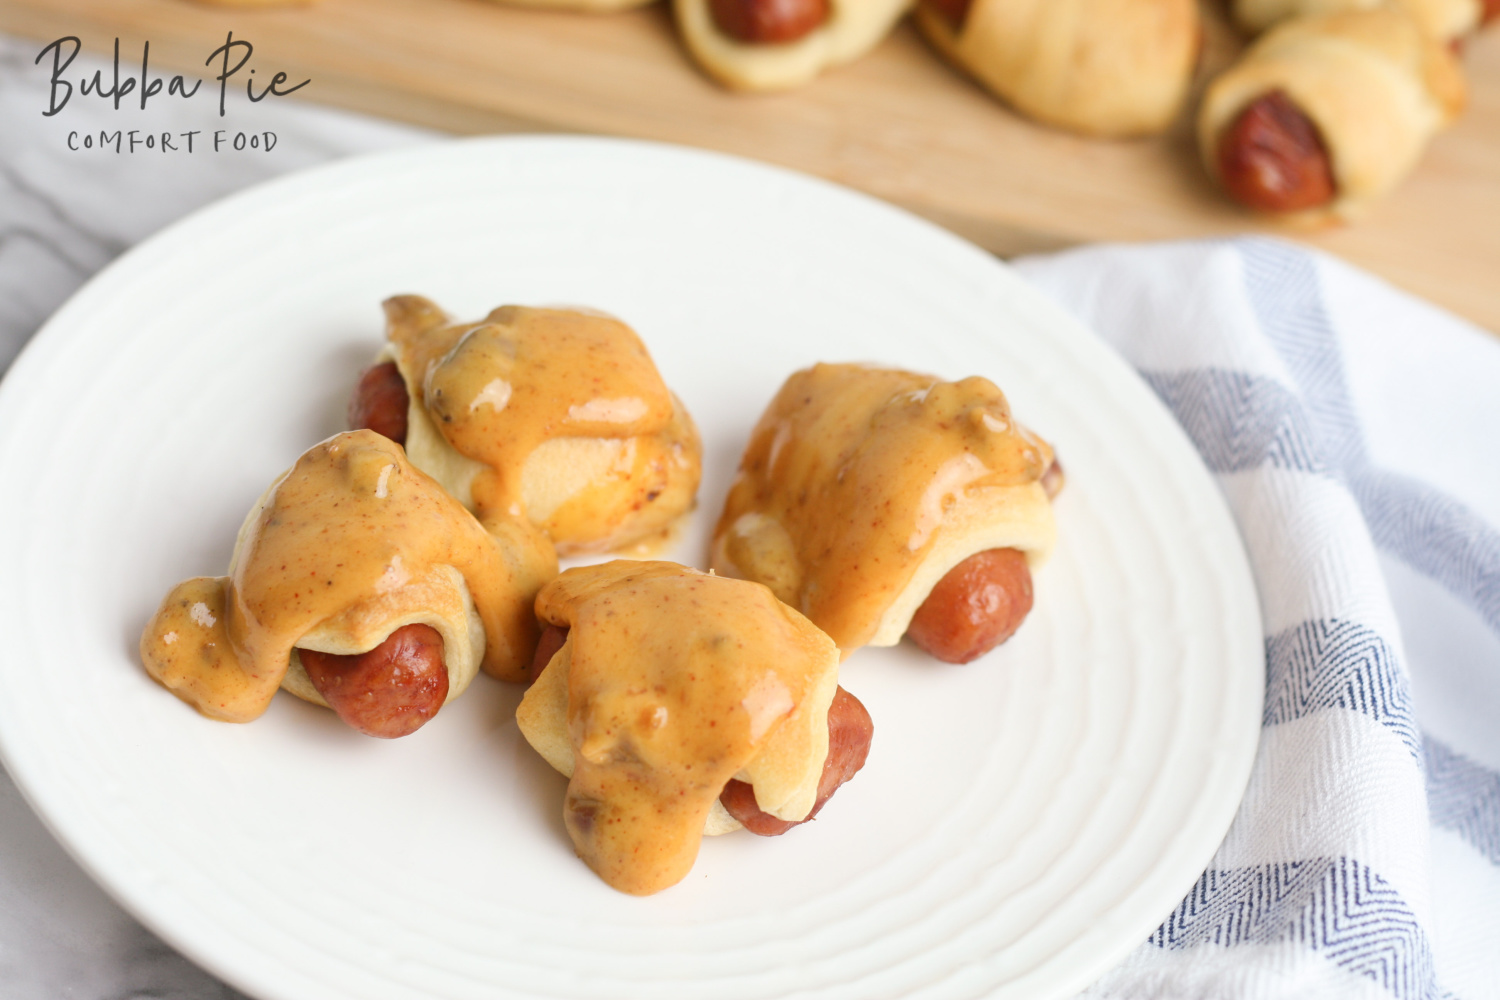 mini pigs in a blanket recipe is the perfect appetizer or idea for an office pitch in.